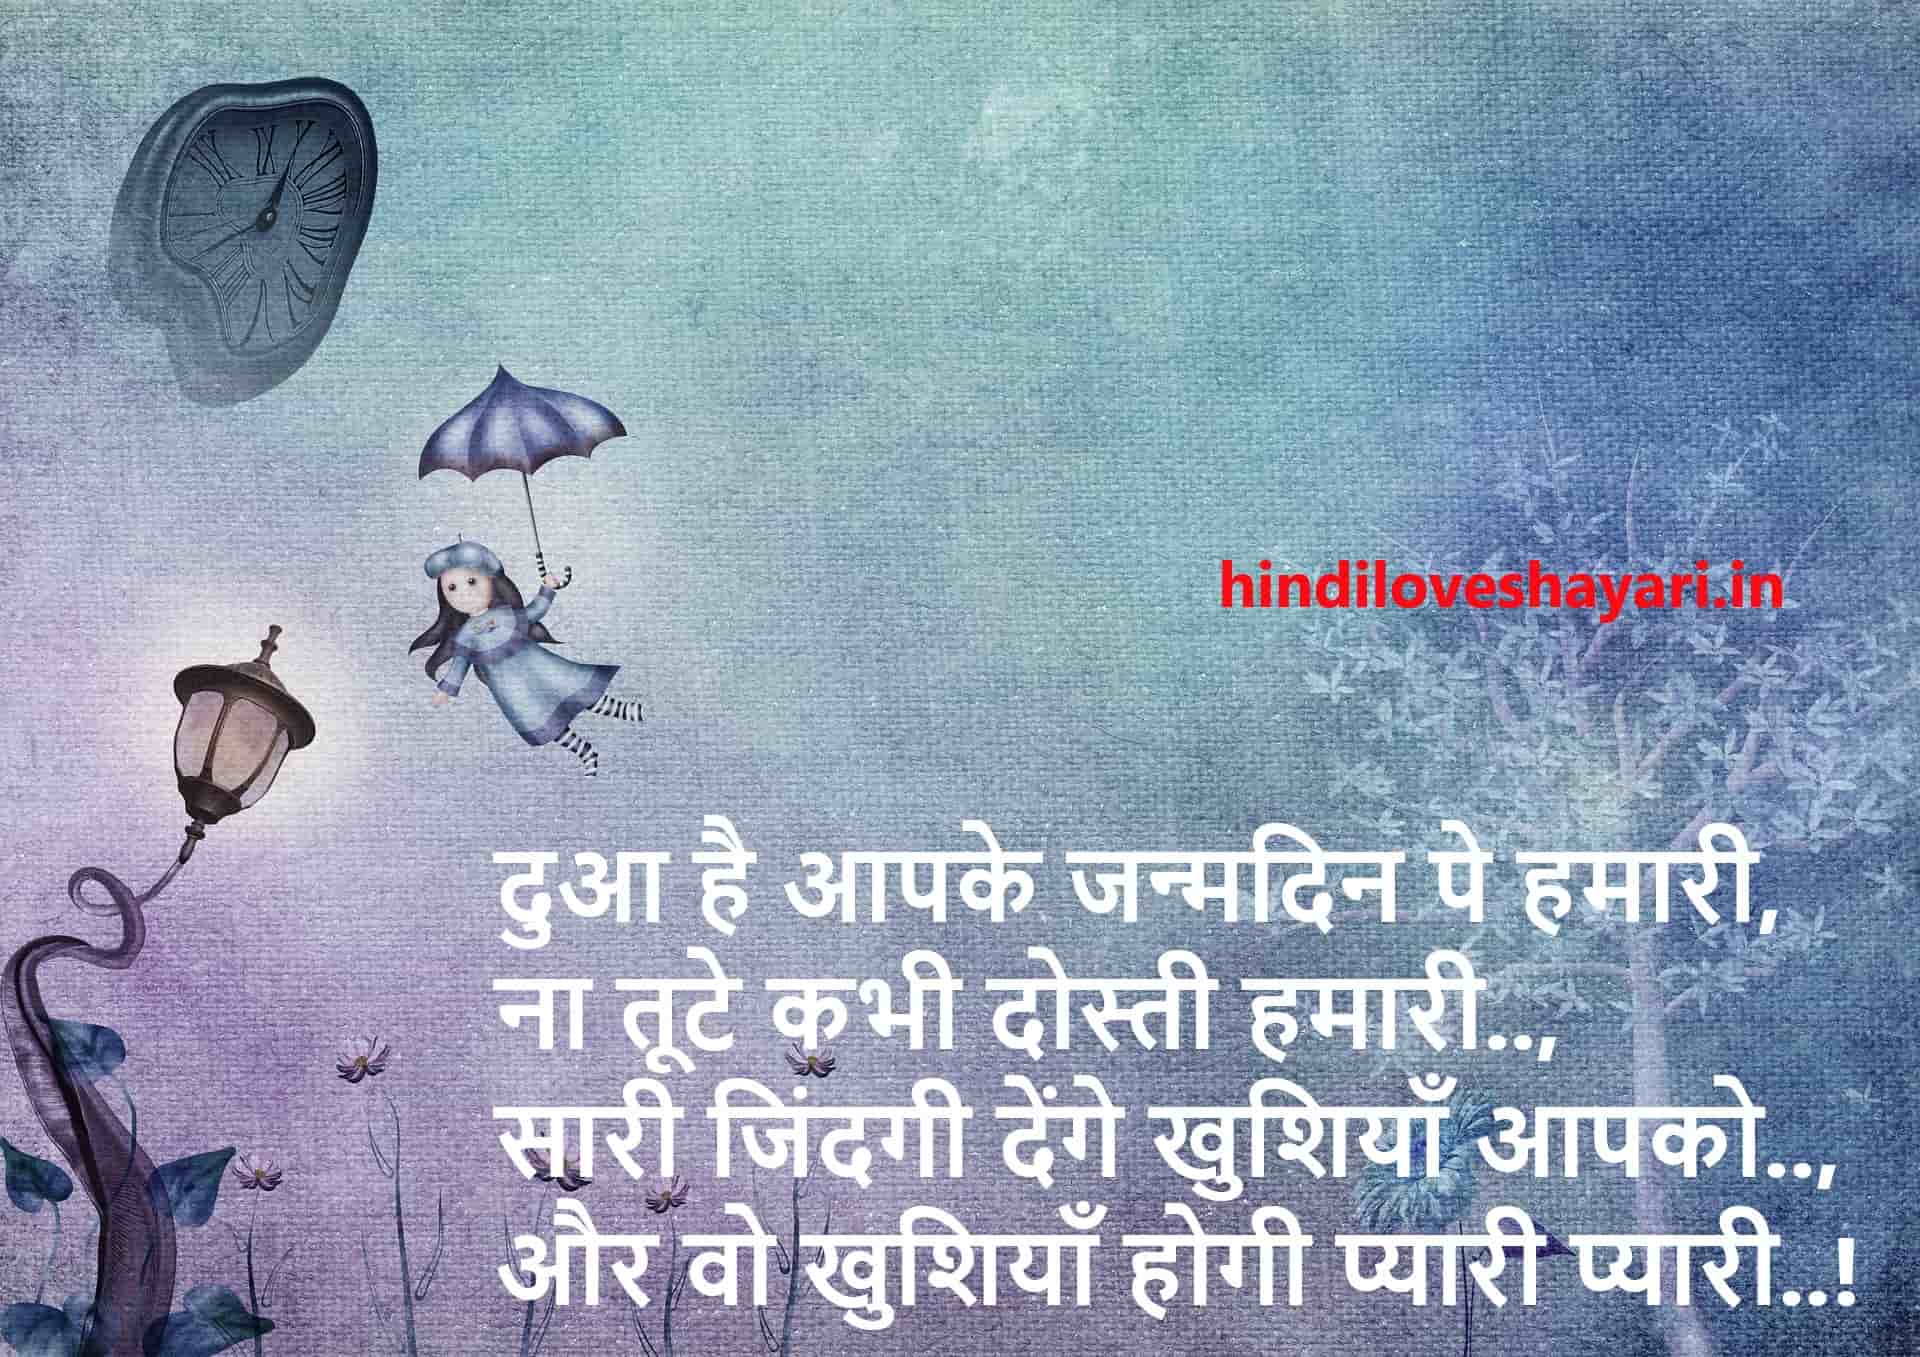 happy birthday shayari text written in hinfi on this image in white colour